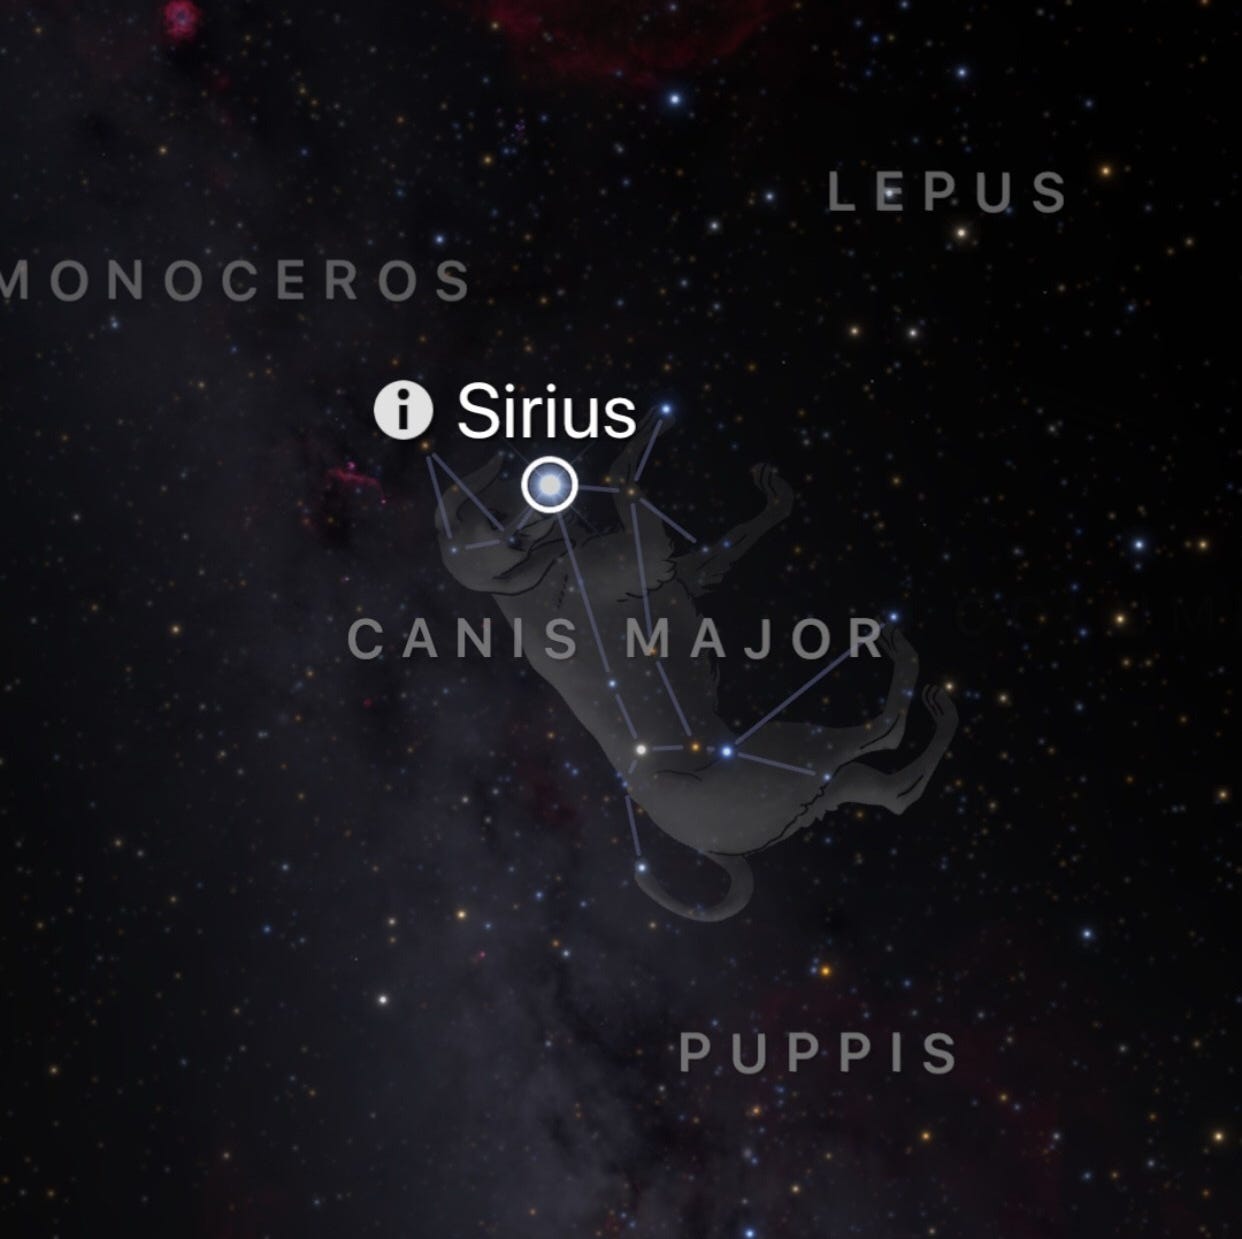 A map of the Sirius star in the Canis Major constellation